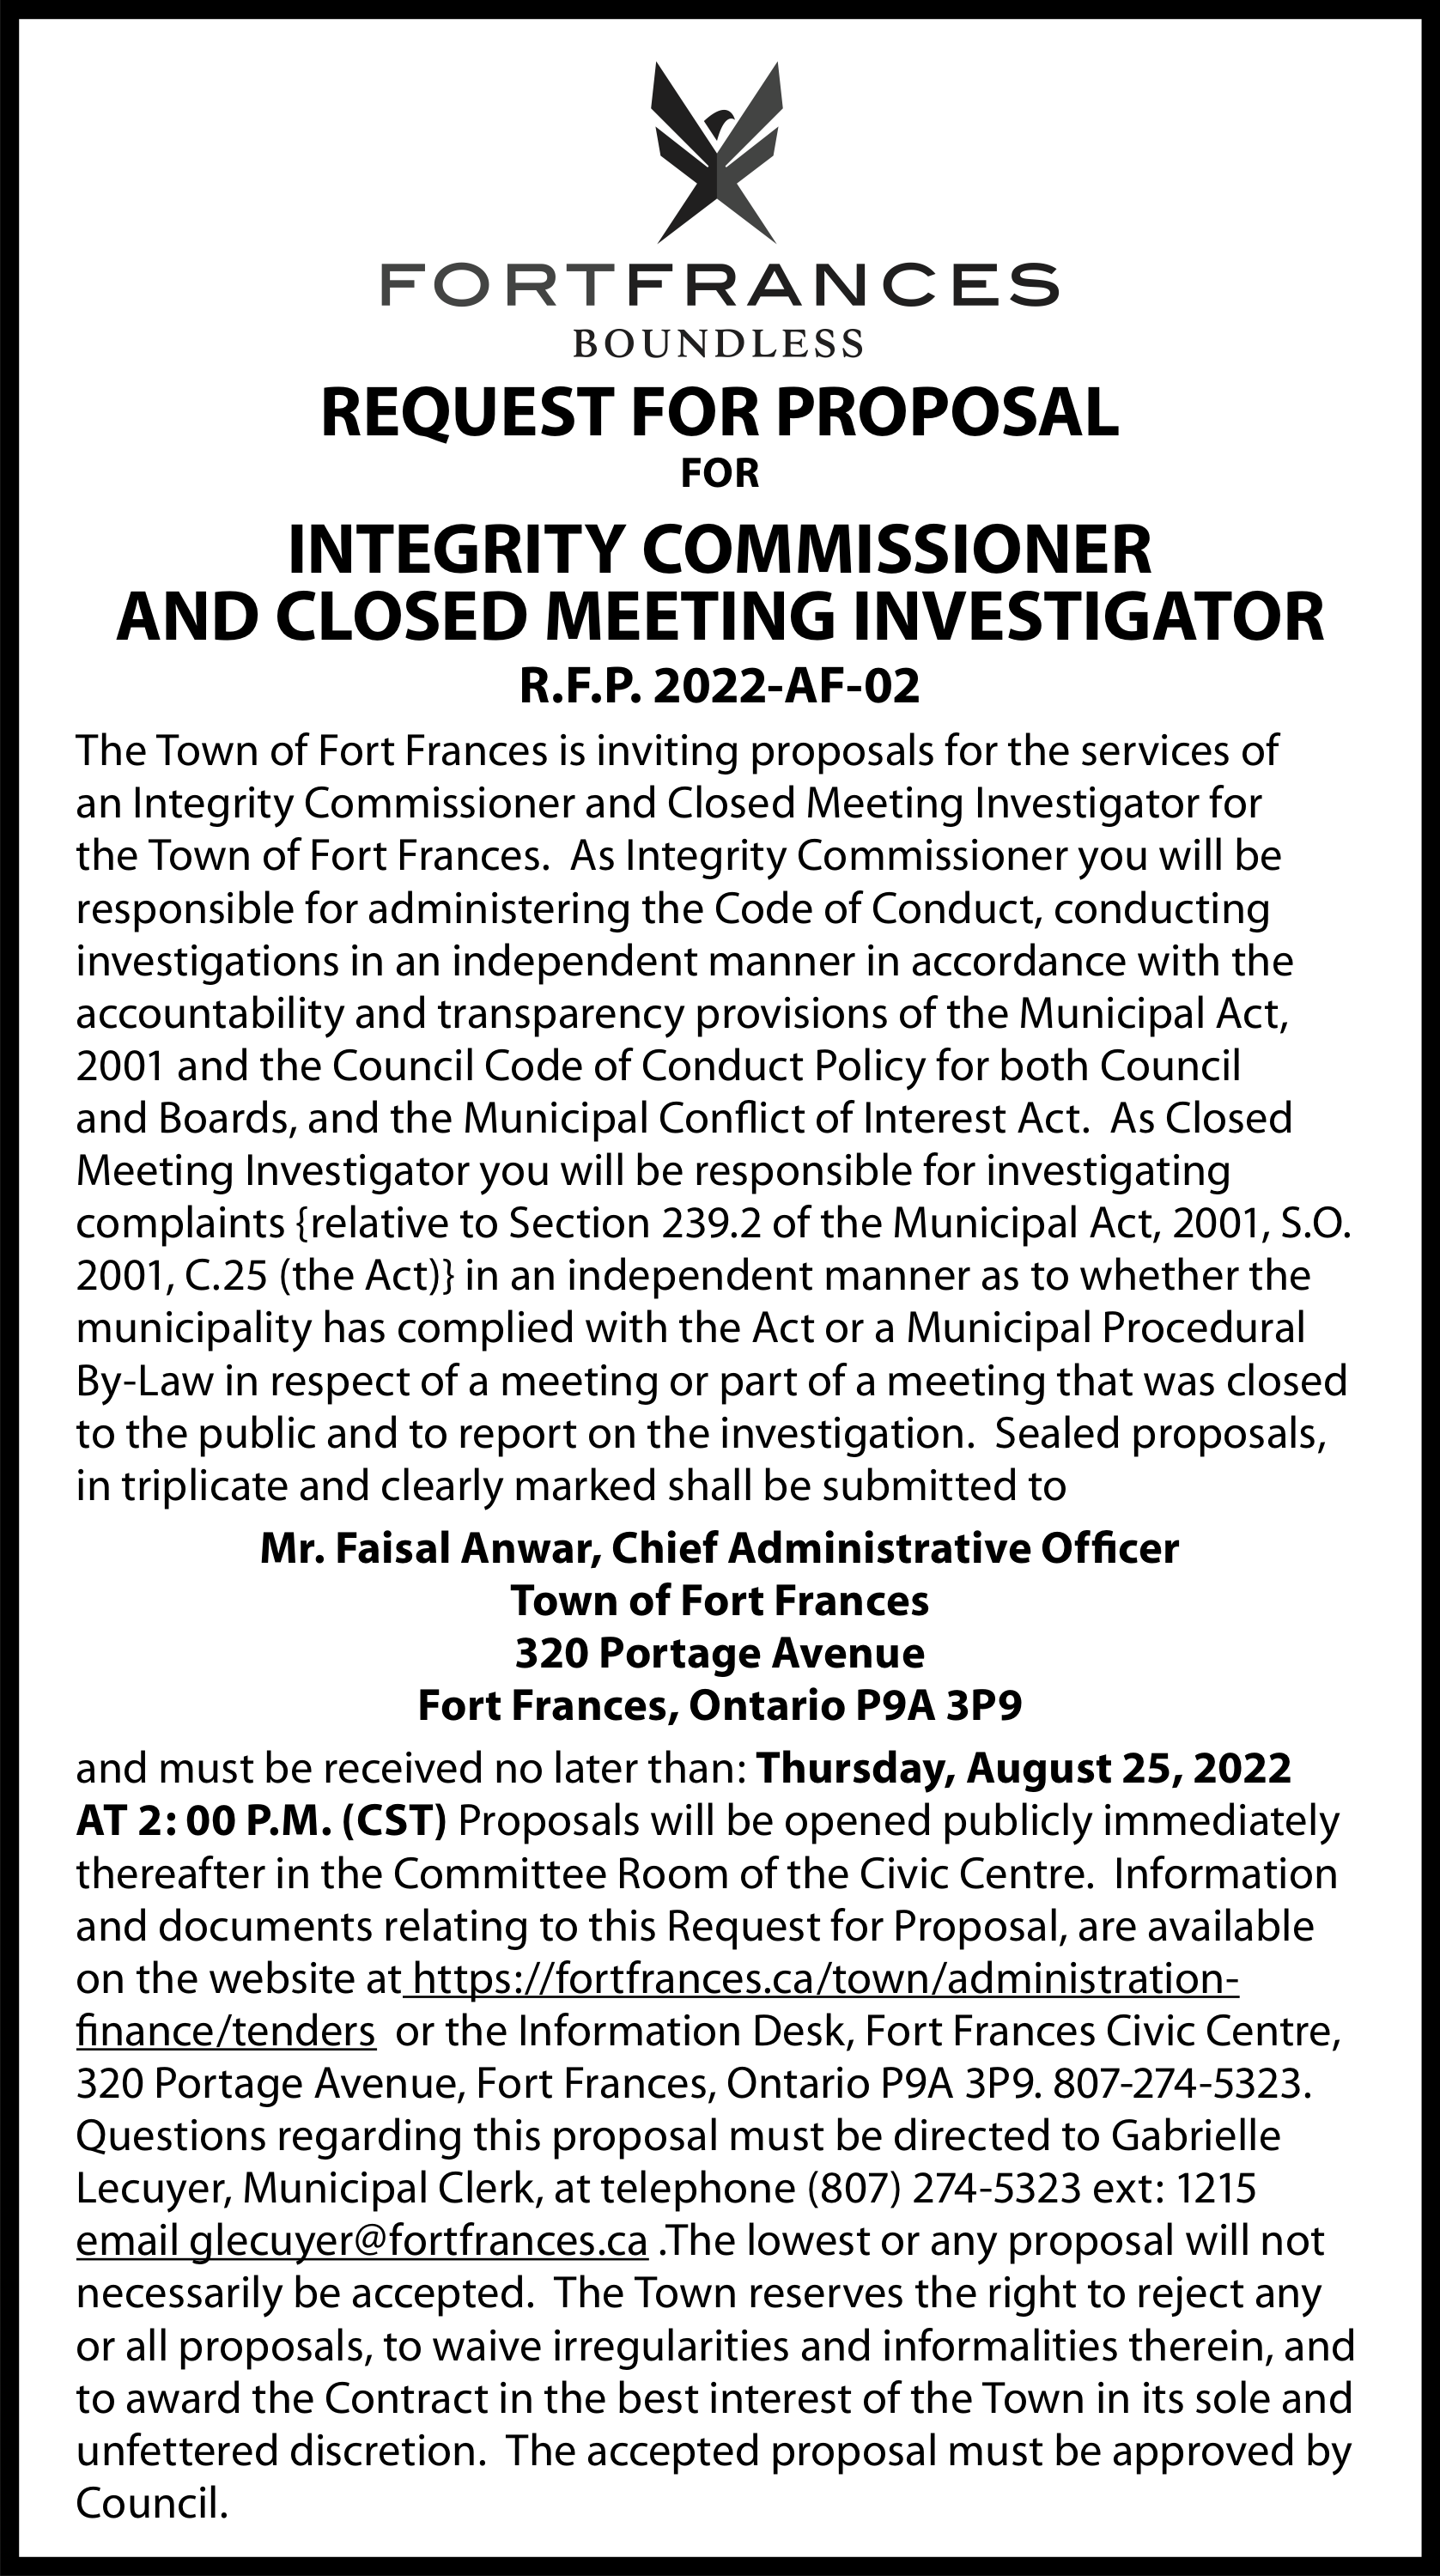 Request for Proposal: Integrity Commissioner and Closed Meeting Investigator